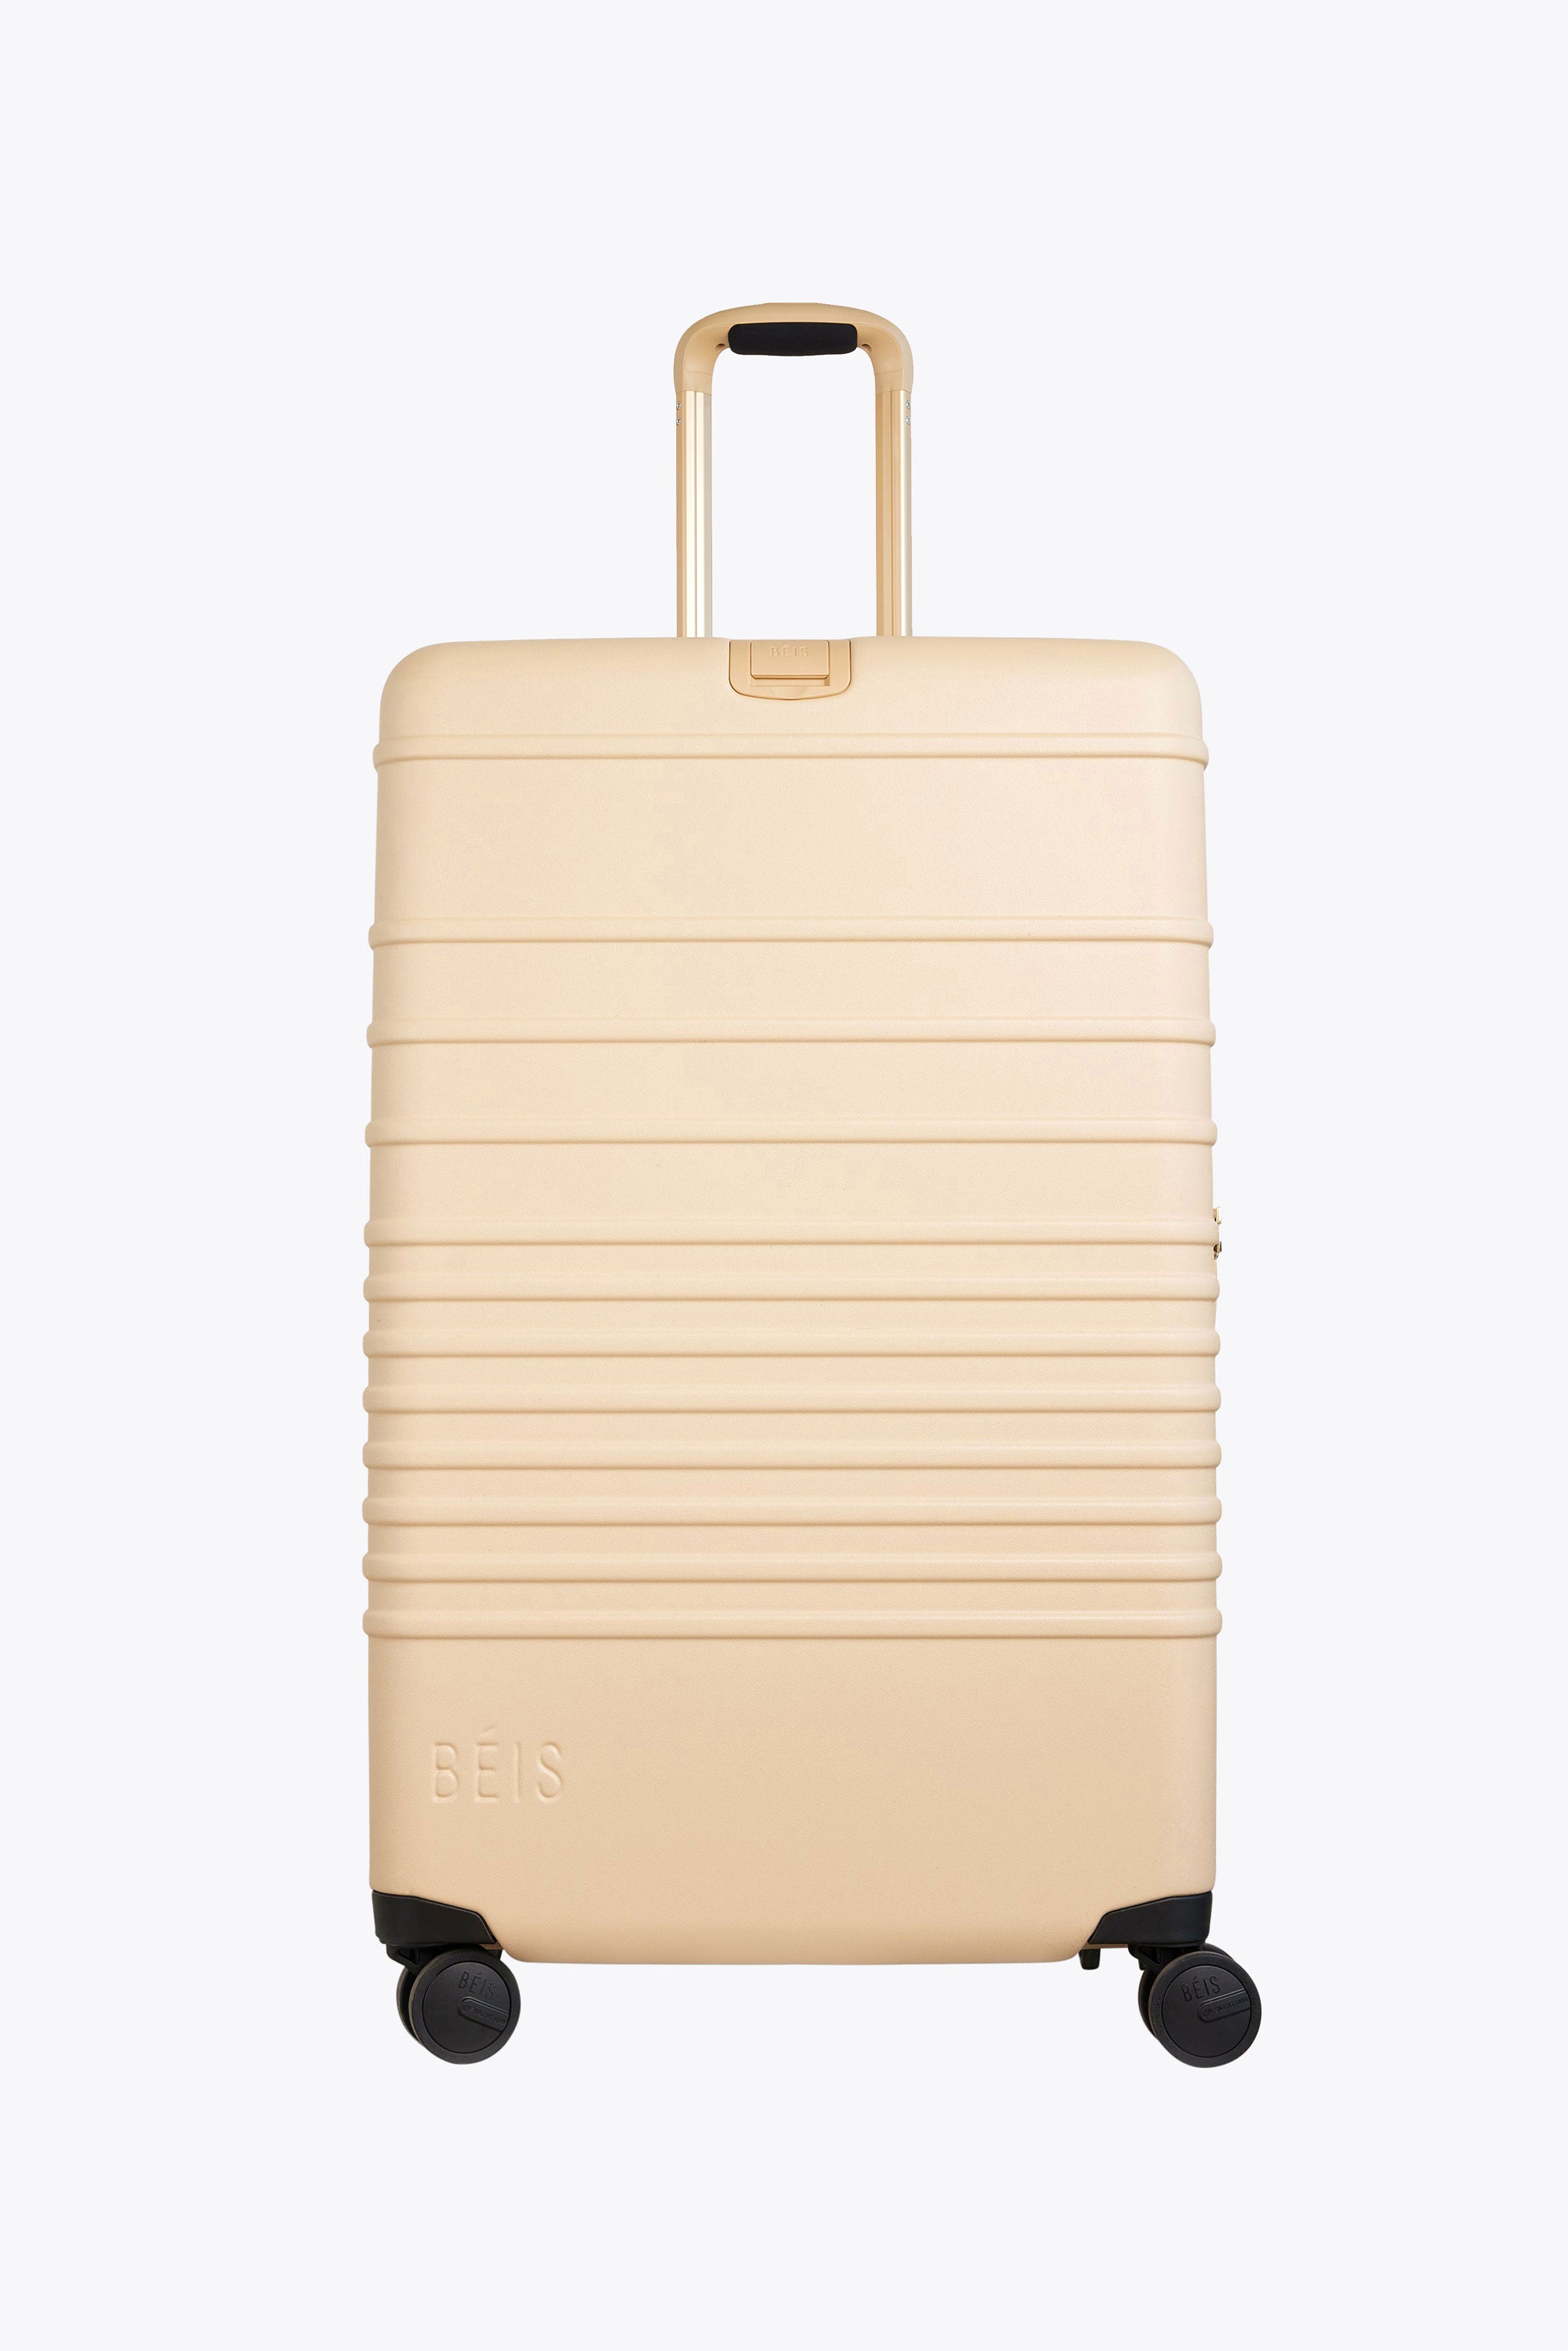 Béis 'The Check-In Roller' in Beige 29 Inch Beige Rolling Luggage